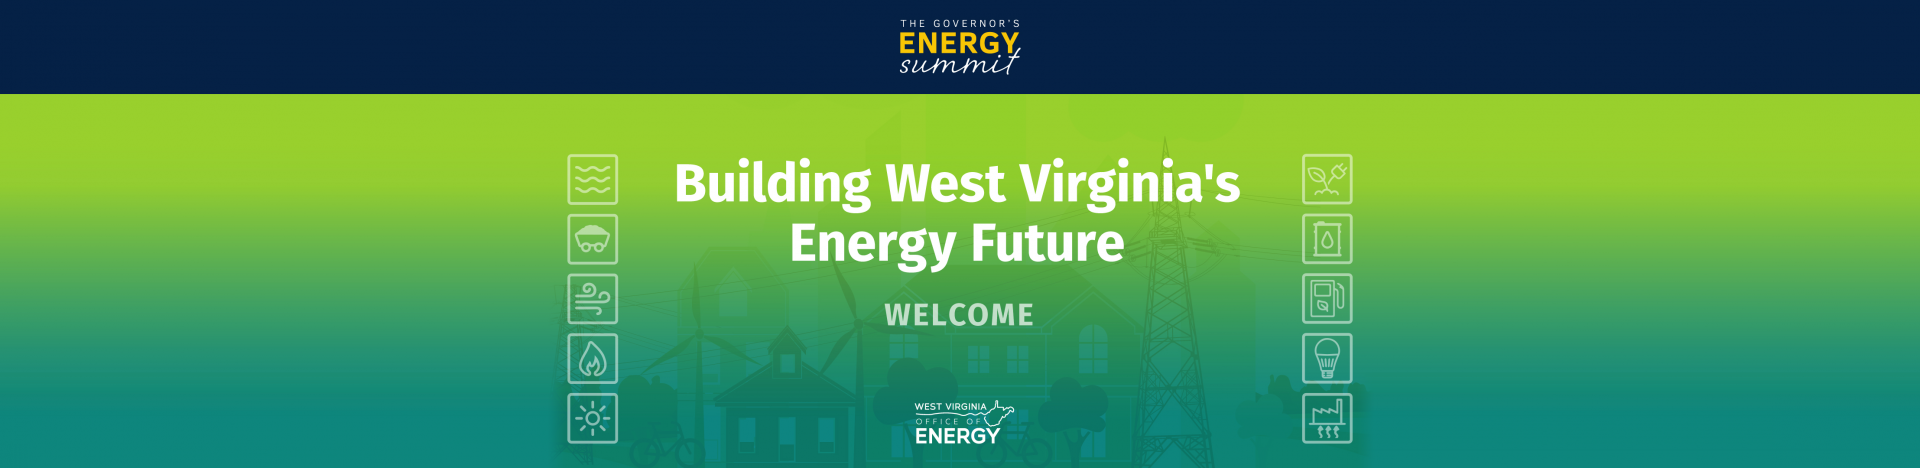 The Governor's Energy Summit